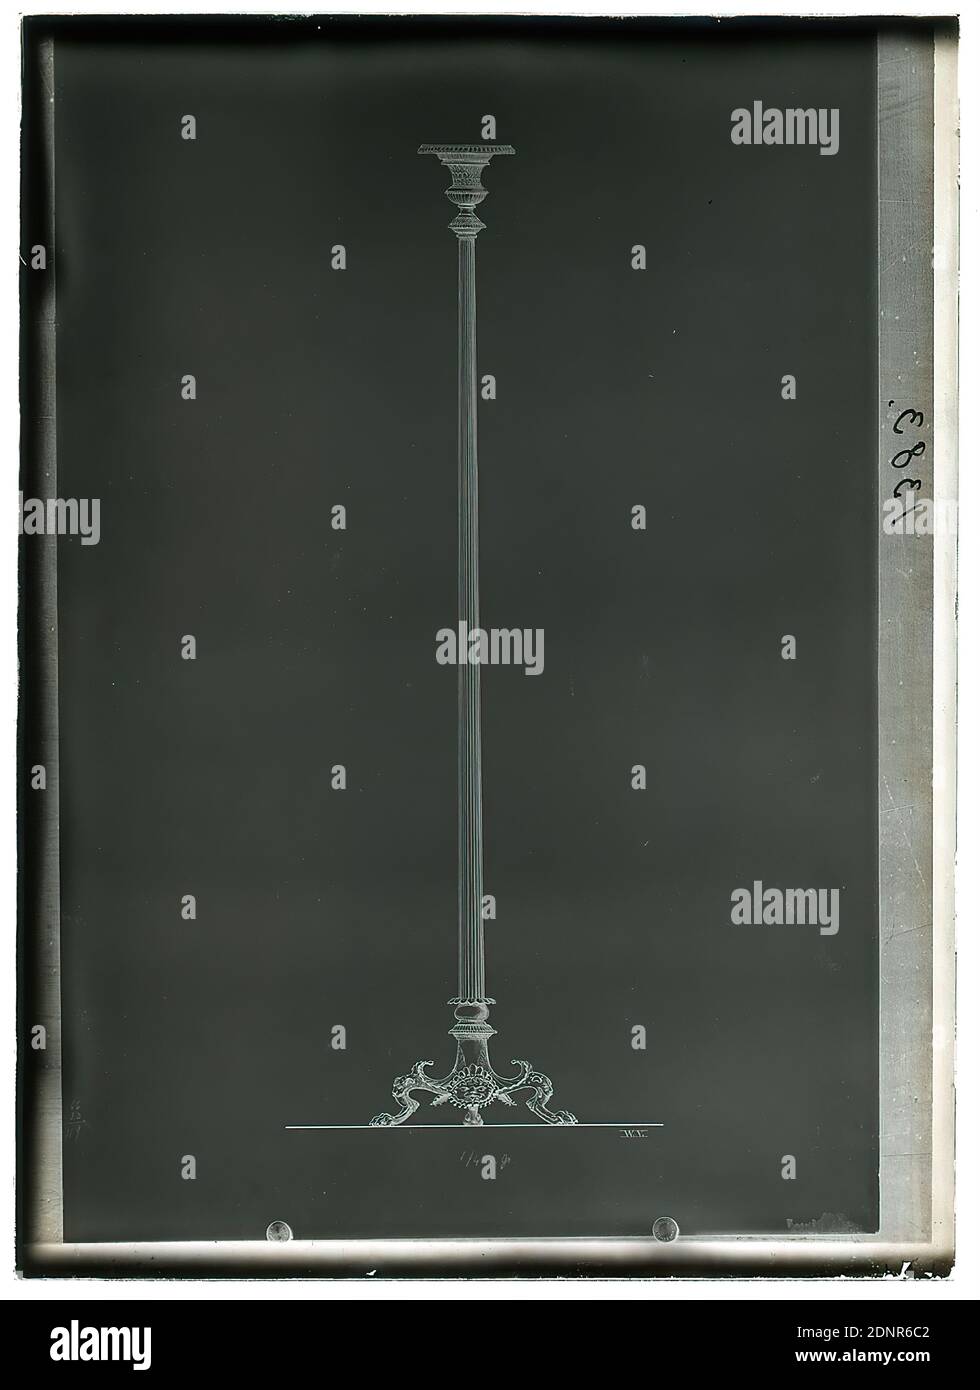 Wilhelm Weimar, candelabra (drawing), glass negative, black and white negative process, total: height: 23,8 cm; width: 17,8 cm, numbered: re. : in black ink: 1383, photography, work of applied art (paper), candleholder, candelabra, A further 1000 glass negatives were created as part of an inventory of Hamburg monuments, which Justus Brinckmann produced on behalf of the Hamburg High School Authority Stock Photo